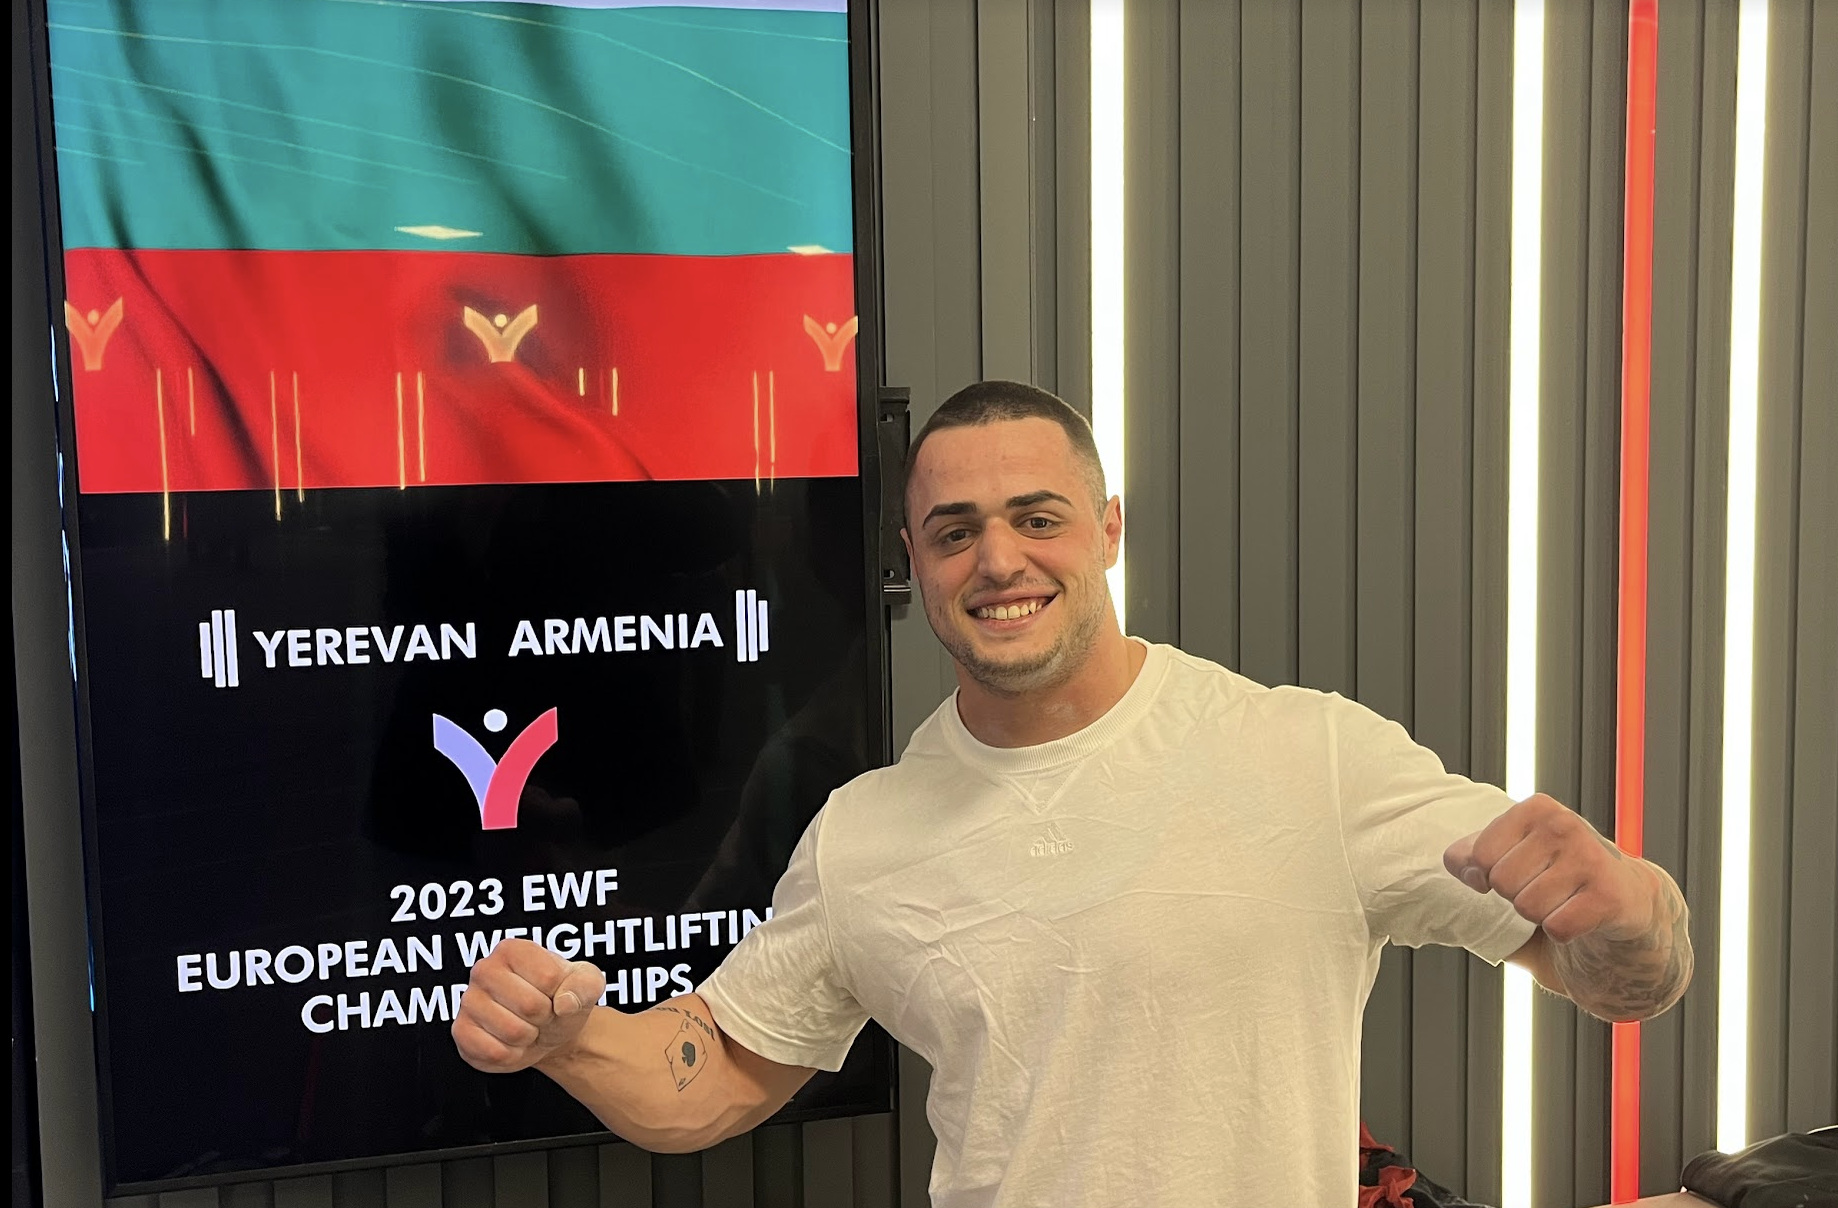 Bulgarian weightlifter Karlos Nasar, who broke two world records at last month's European Championships in Yerevan, has suffered a serious injury in a freak accident ©ITG 